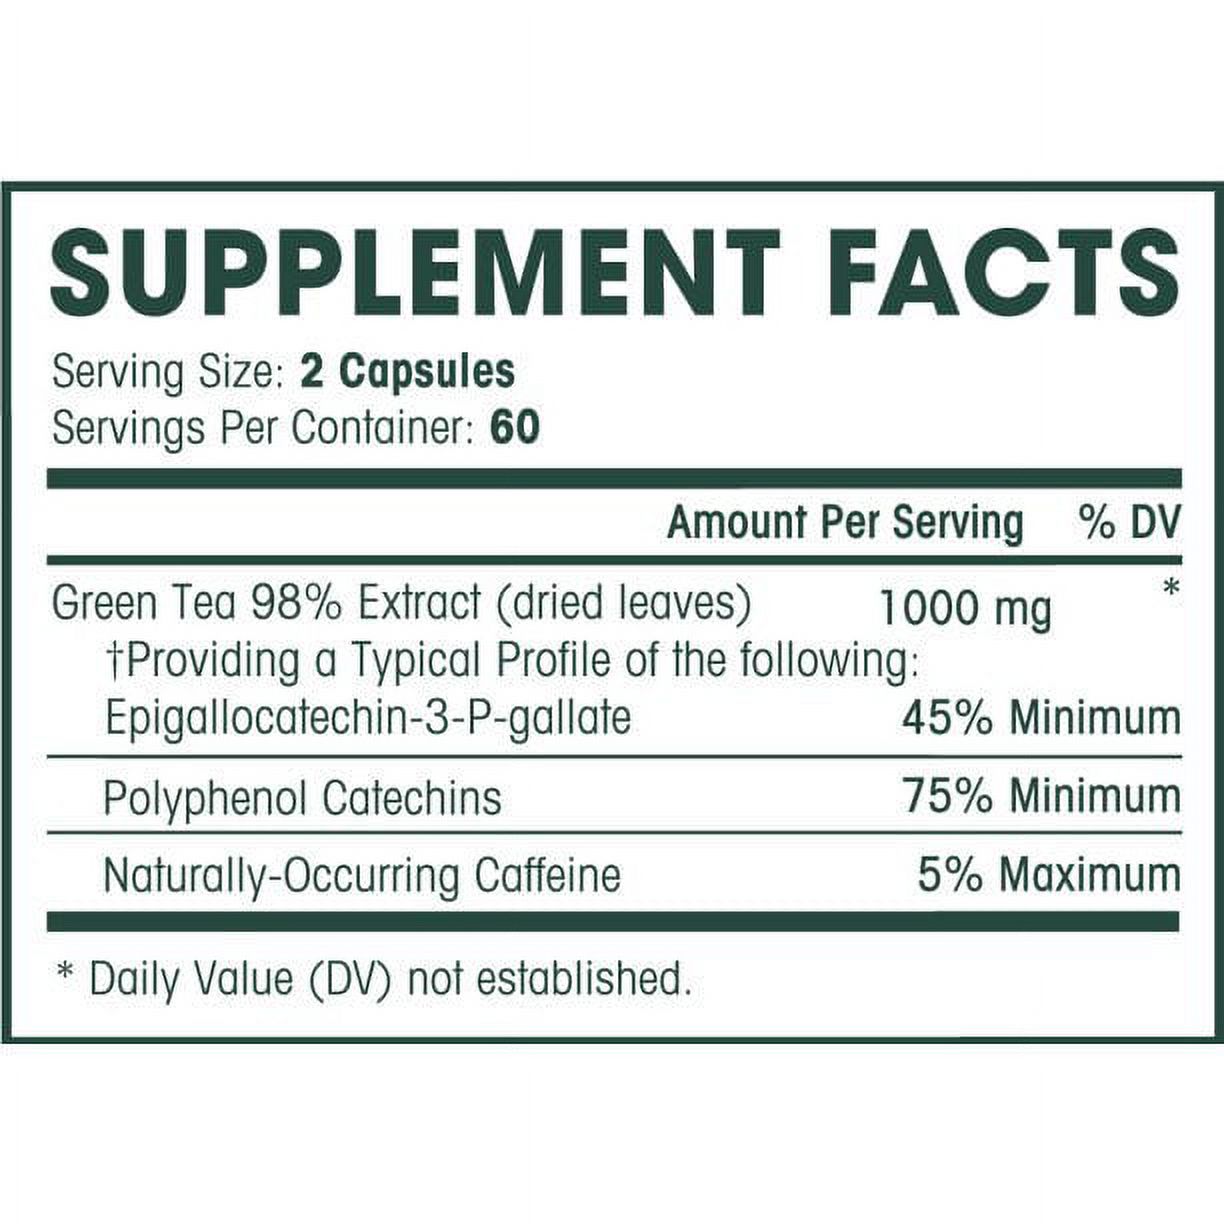 EGCG Green Tea Extract Capsules - Powerful Metabolism Booster for Weight Loss, Energy and Heart Health - Green Tea Pills Are Natural Caffeine Pills with Antioxidants & Free Radical Scavengers - 500mg - image 3 of 8